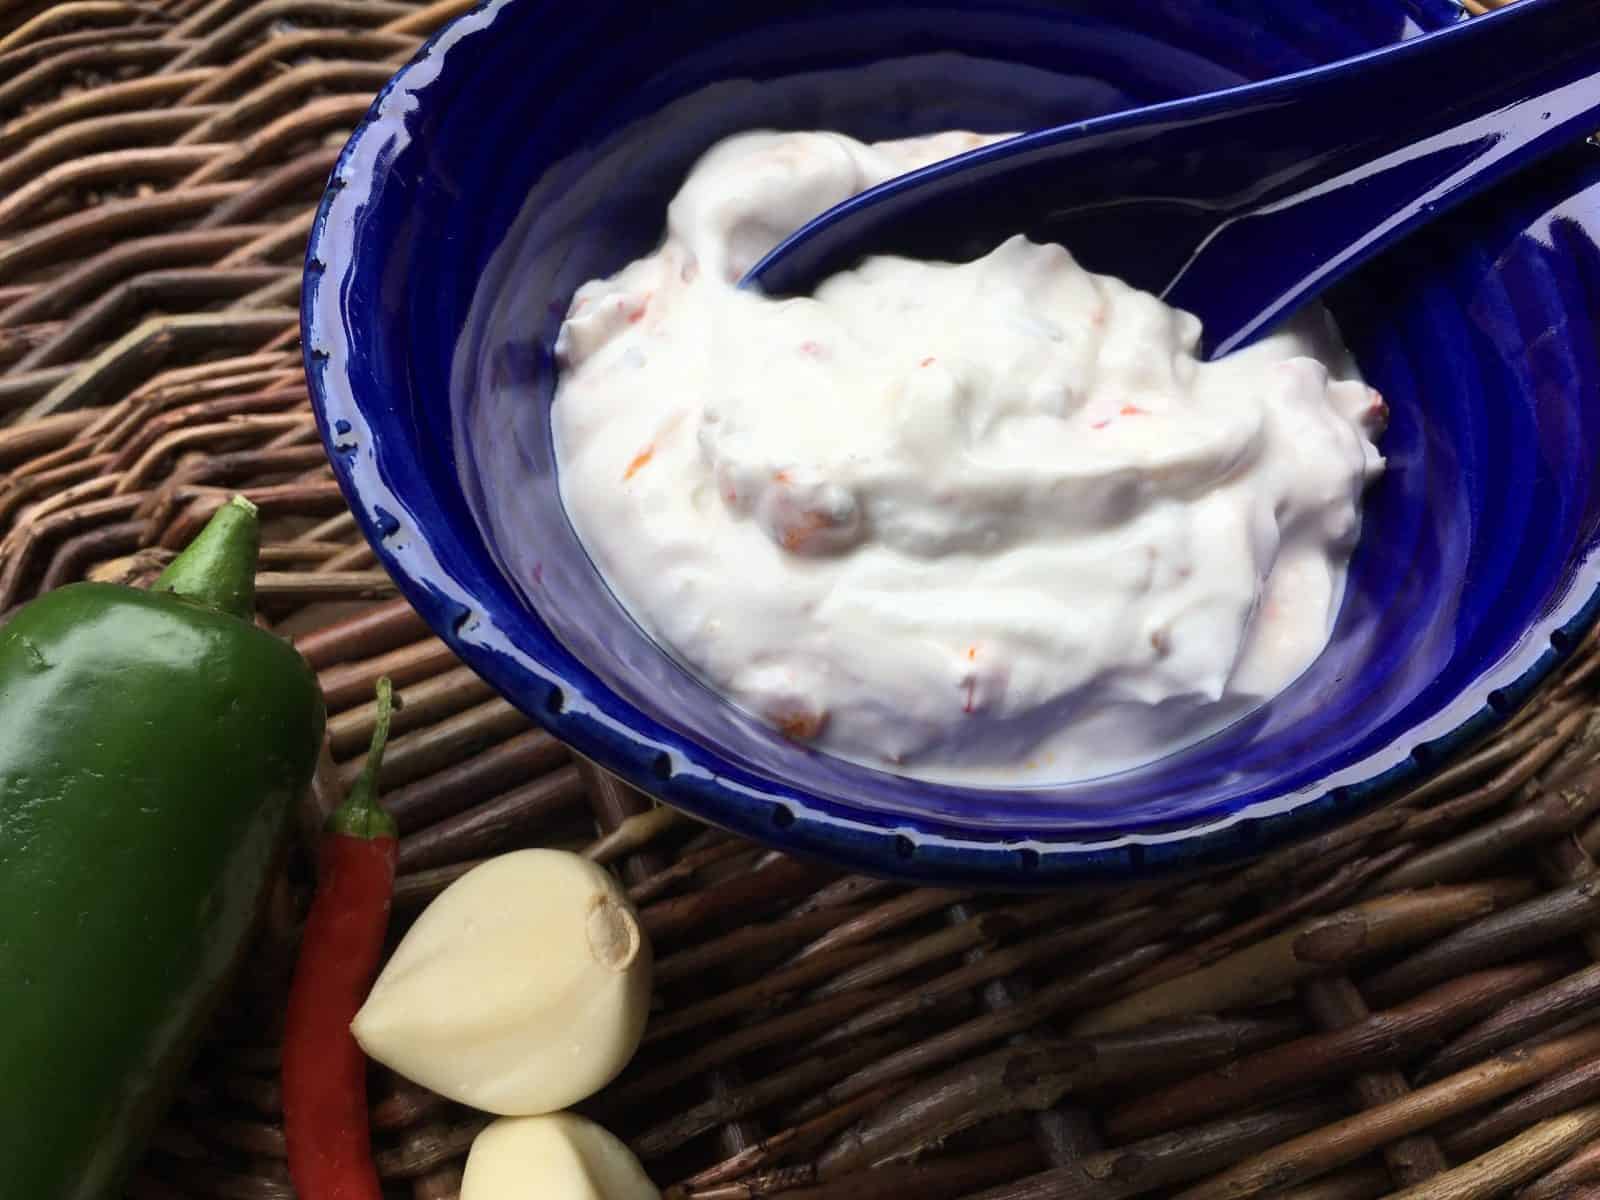 jalapeno cream in a bowl